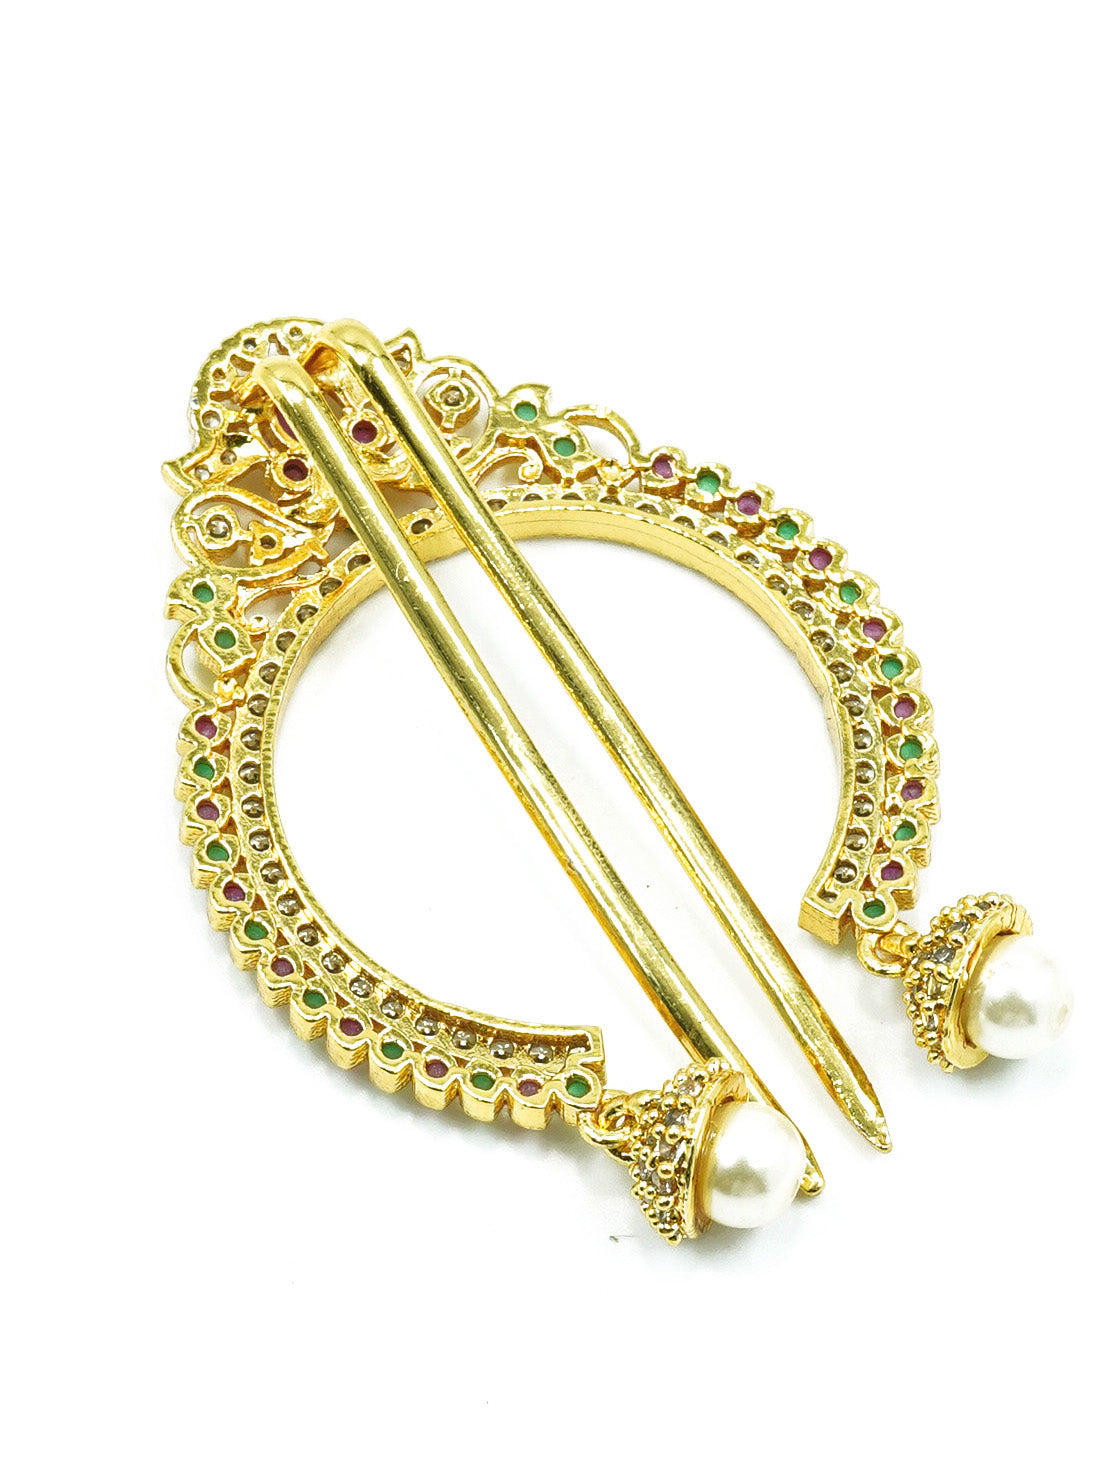 22k 1gm Gold Plated Emerald Stone Colour Studded Amboda / Hair Bow Pin 10677N